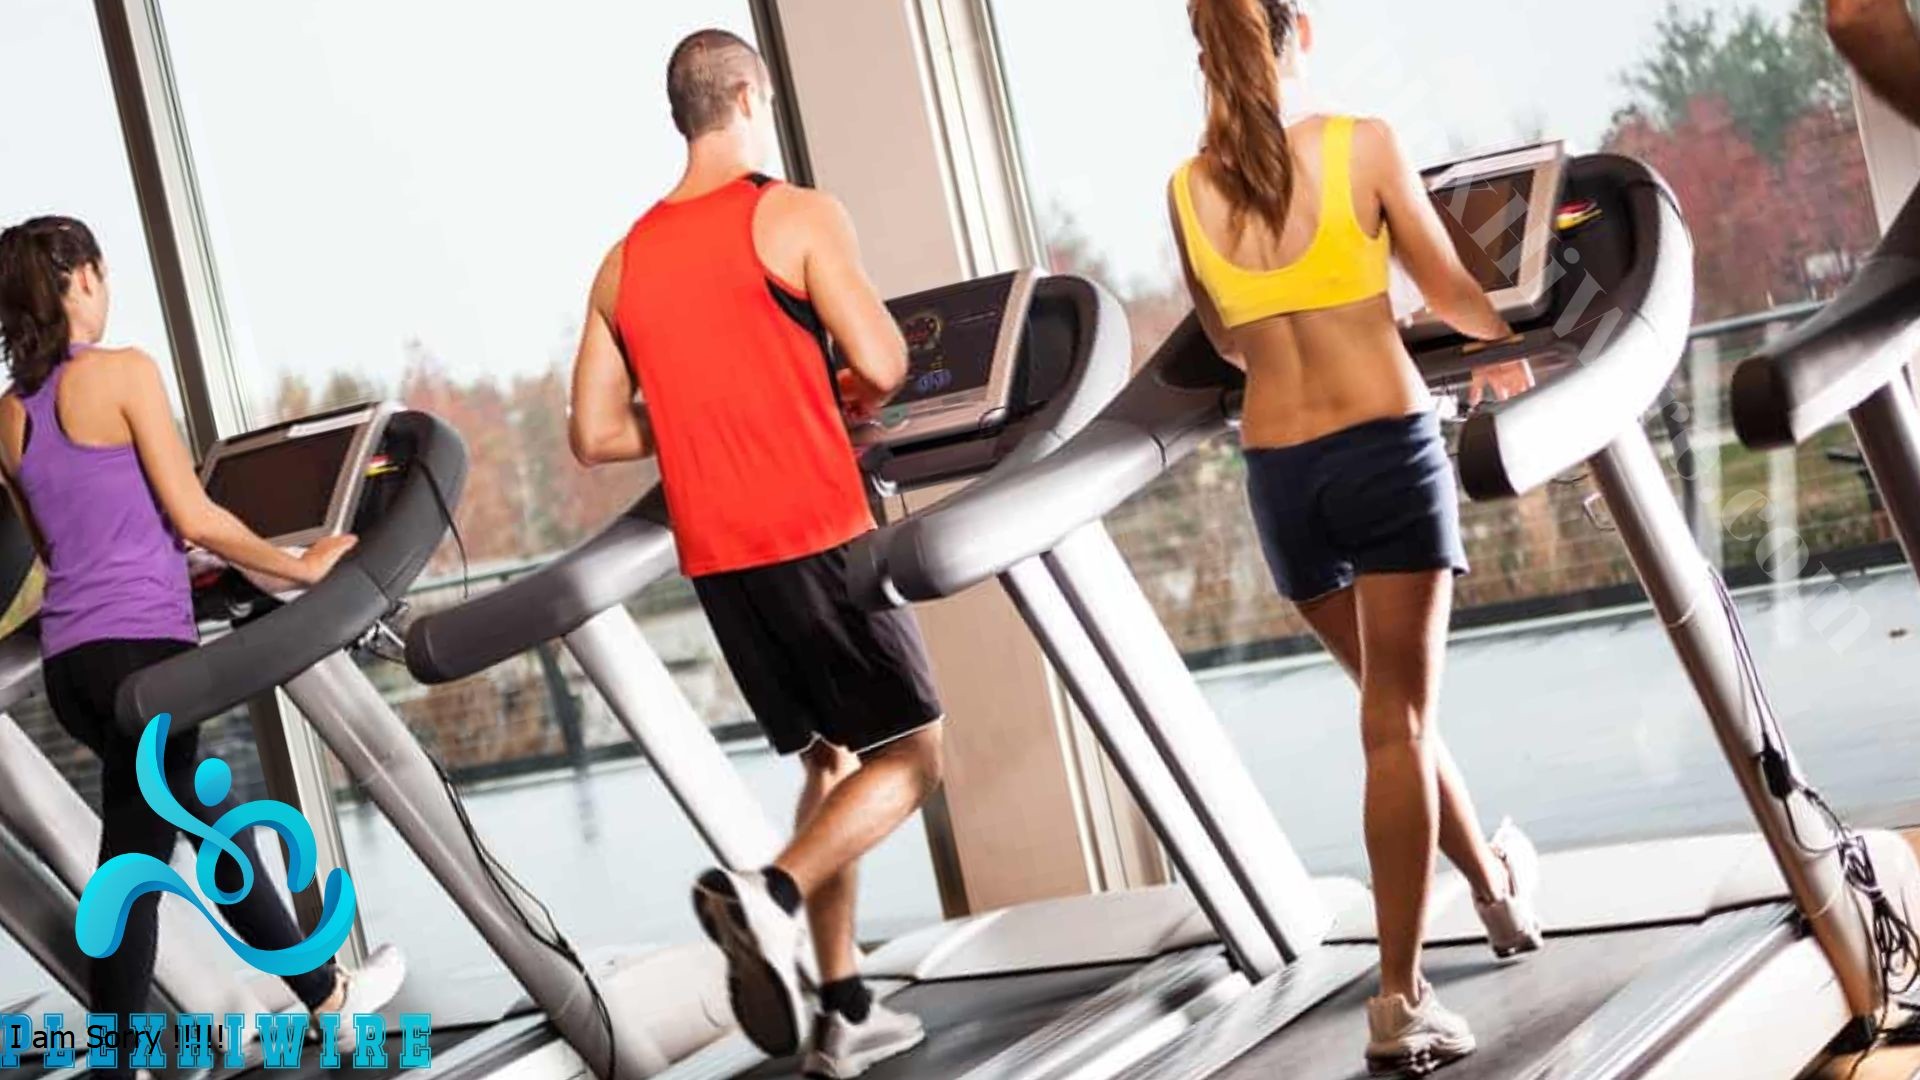 Lose Weight Walking on a Treadmill